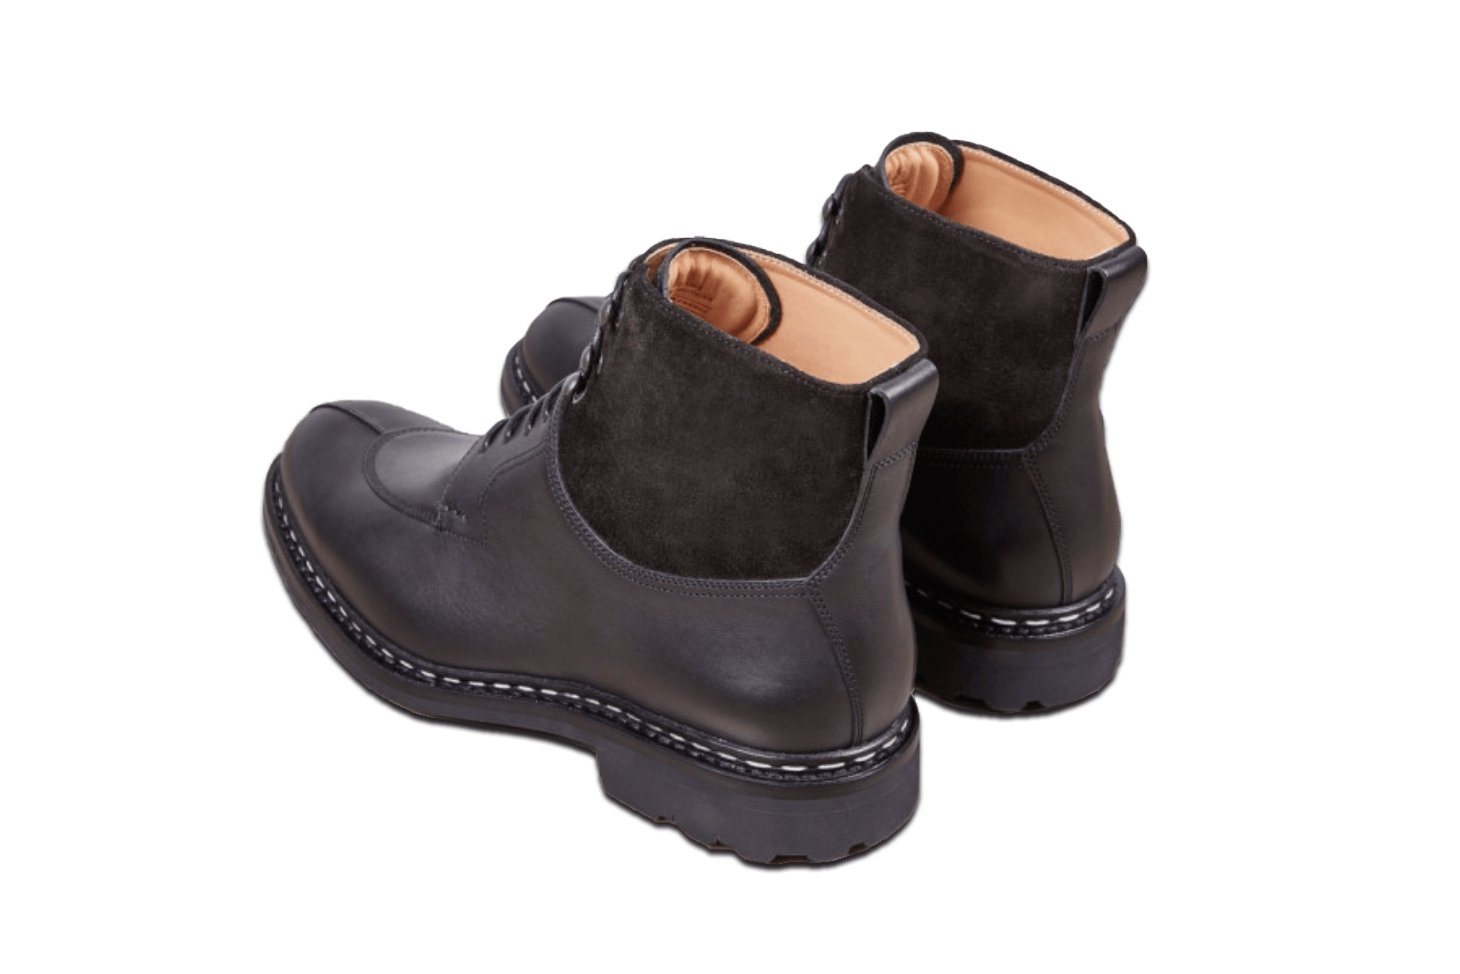 HESCHUNG - GINKGO | Leather Boot with Suede Collar | Black - HANSEN Garments